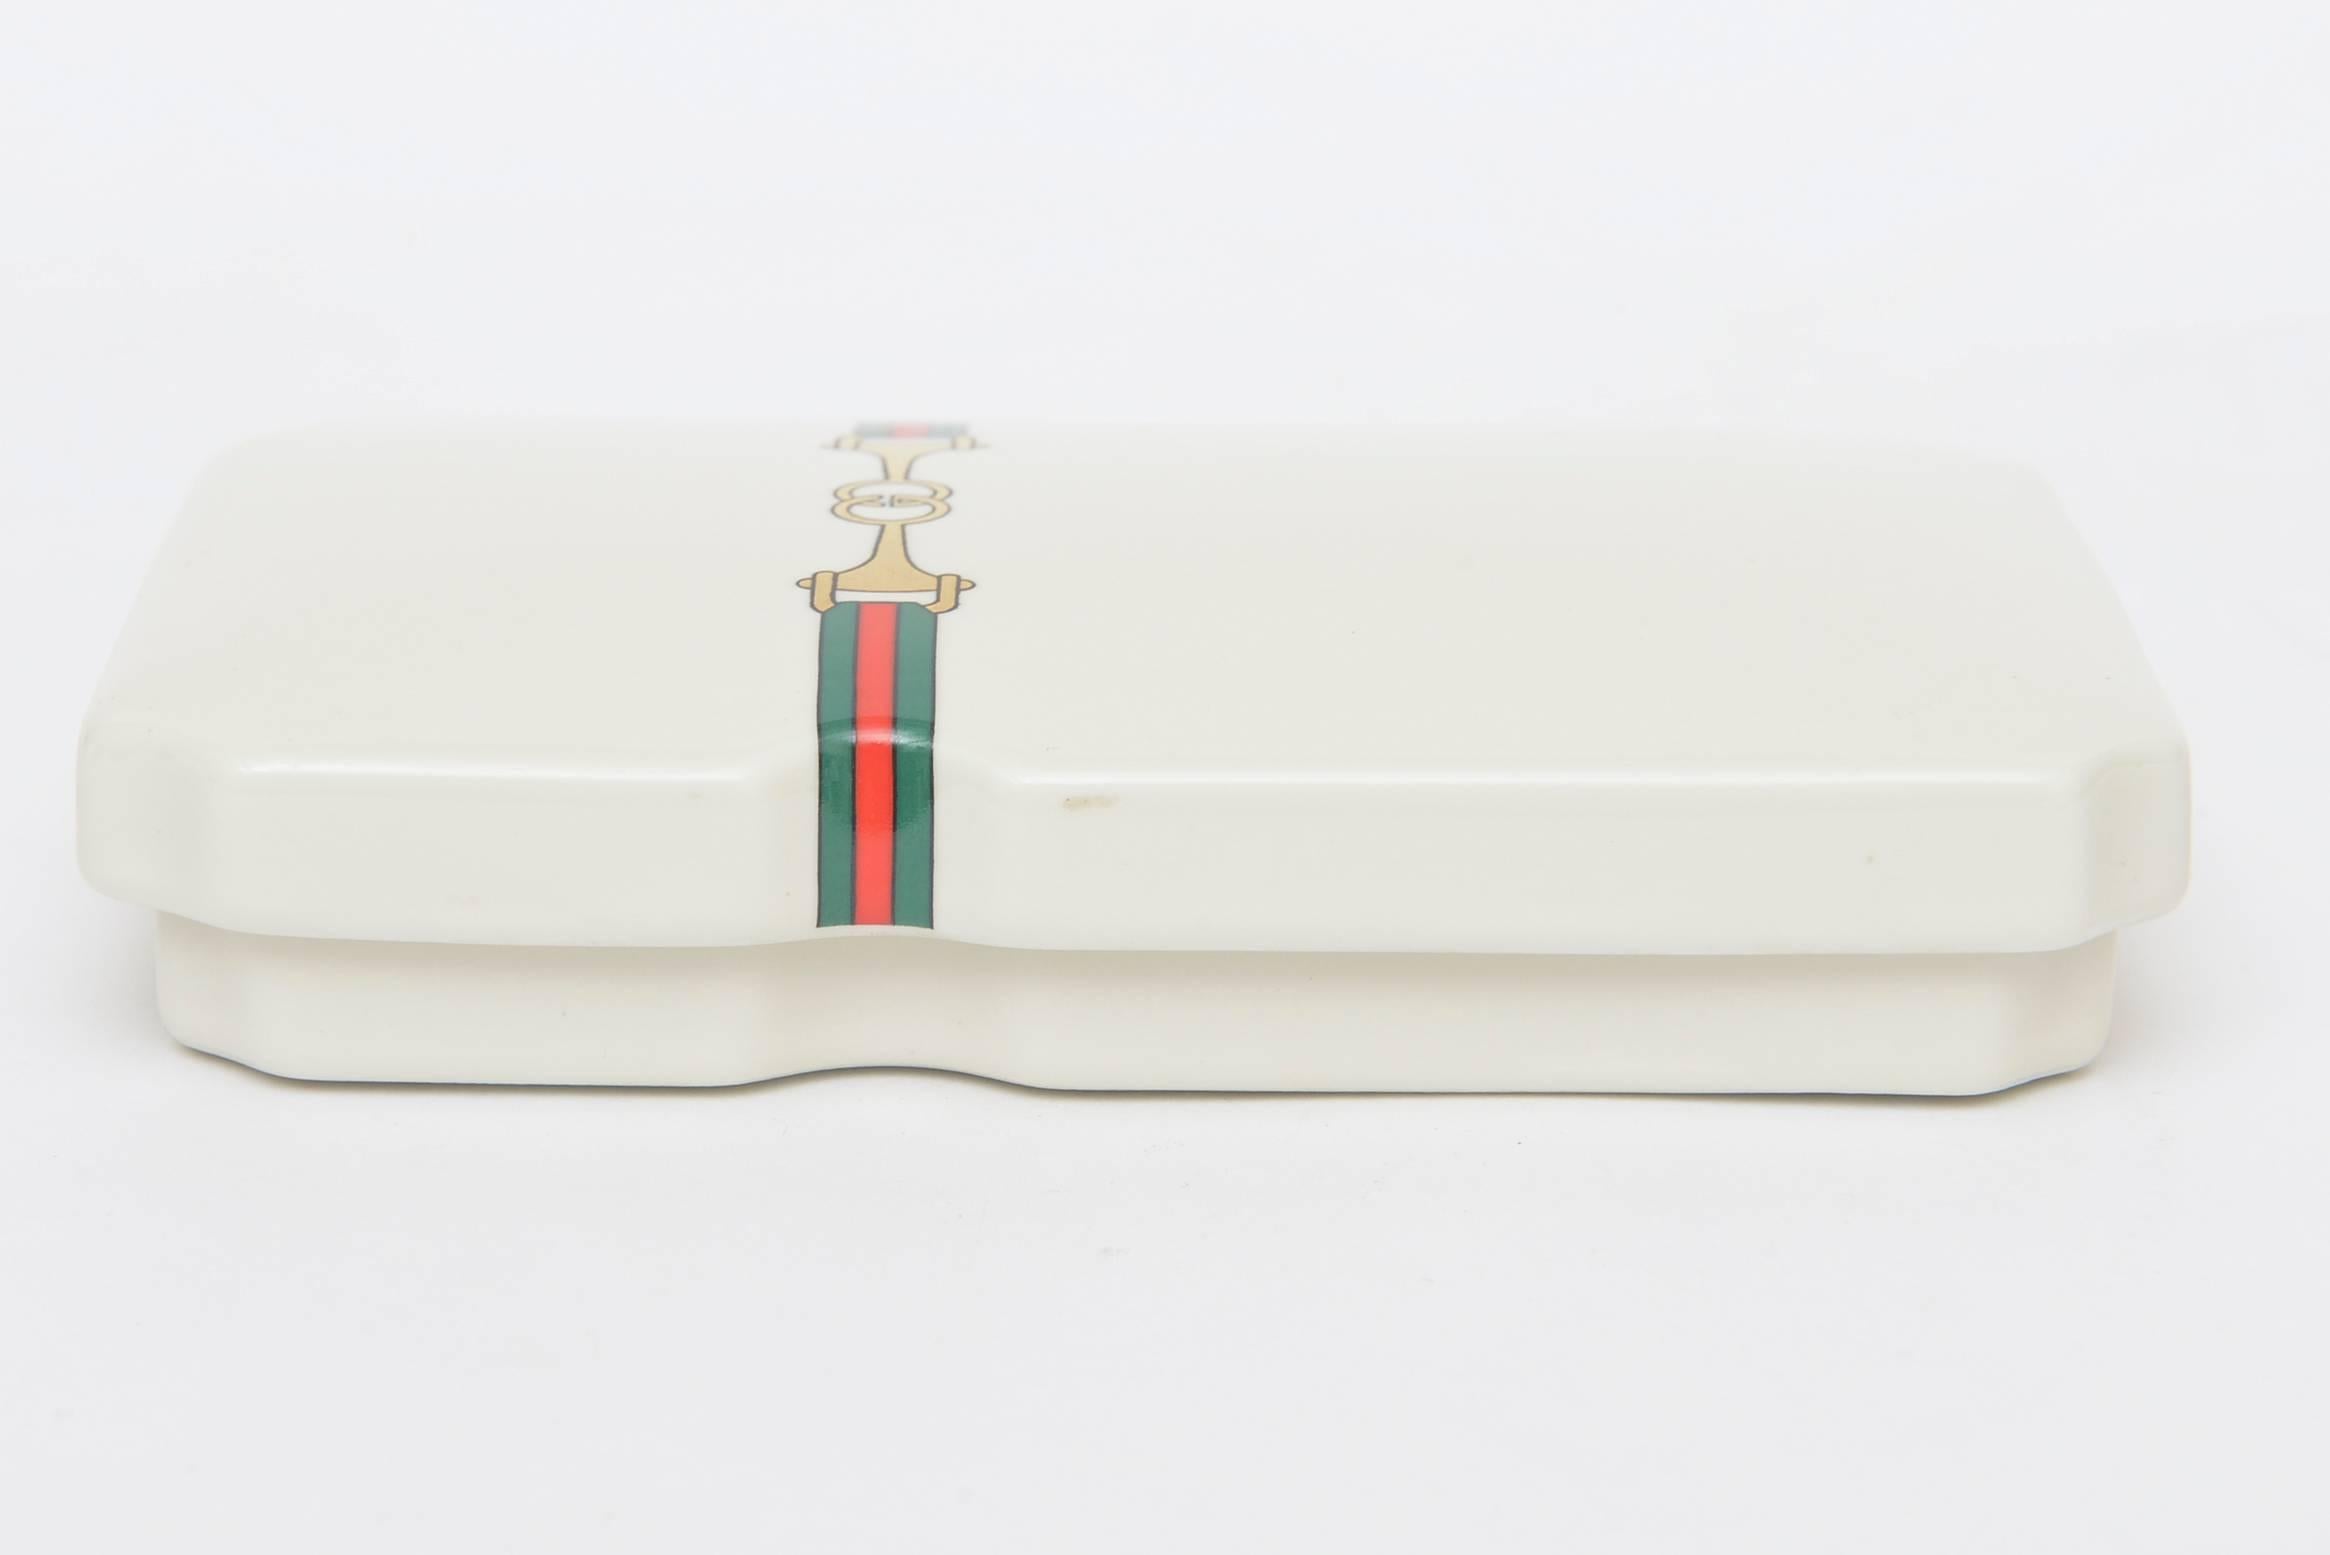 This vintage Gucci two-part lidded porcelain incense box is a great gift.
Just a few of the small pieces of incense remain from the original owner. They were red and green. The incense porcelain container is inside and bordered with gold